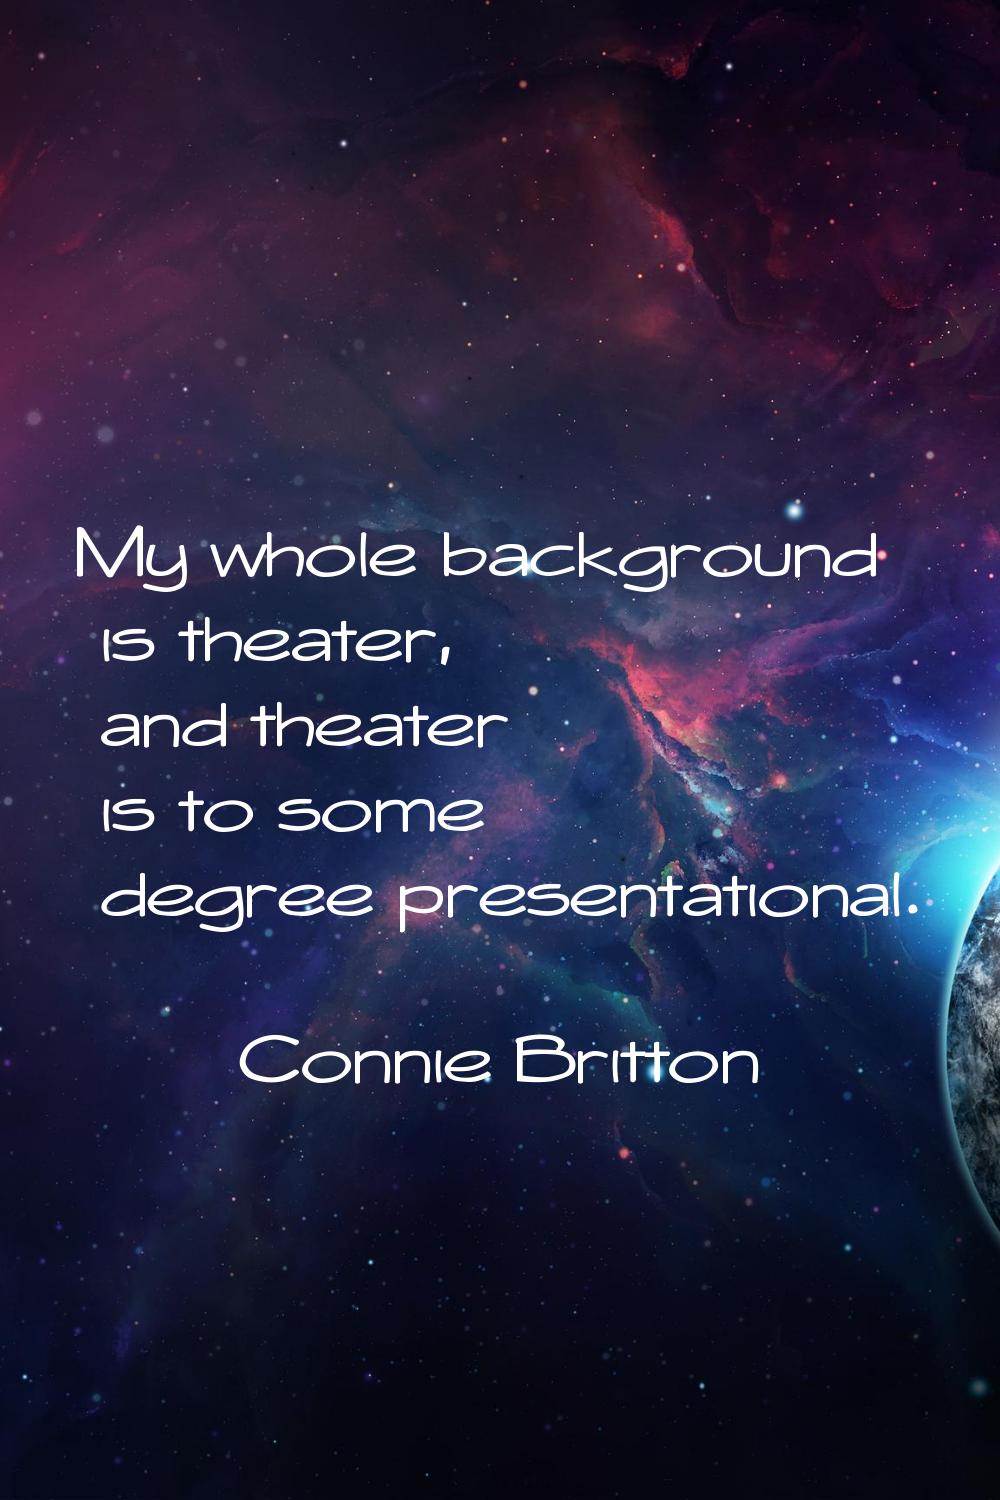 My whole background is theater, and theater is to some degree presentational.